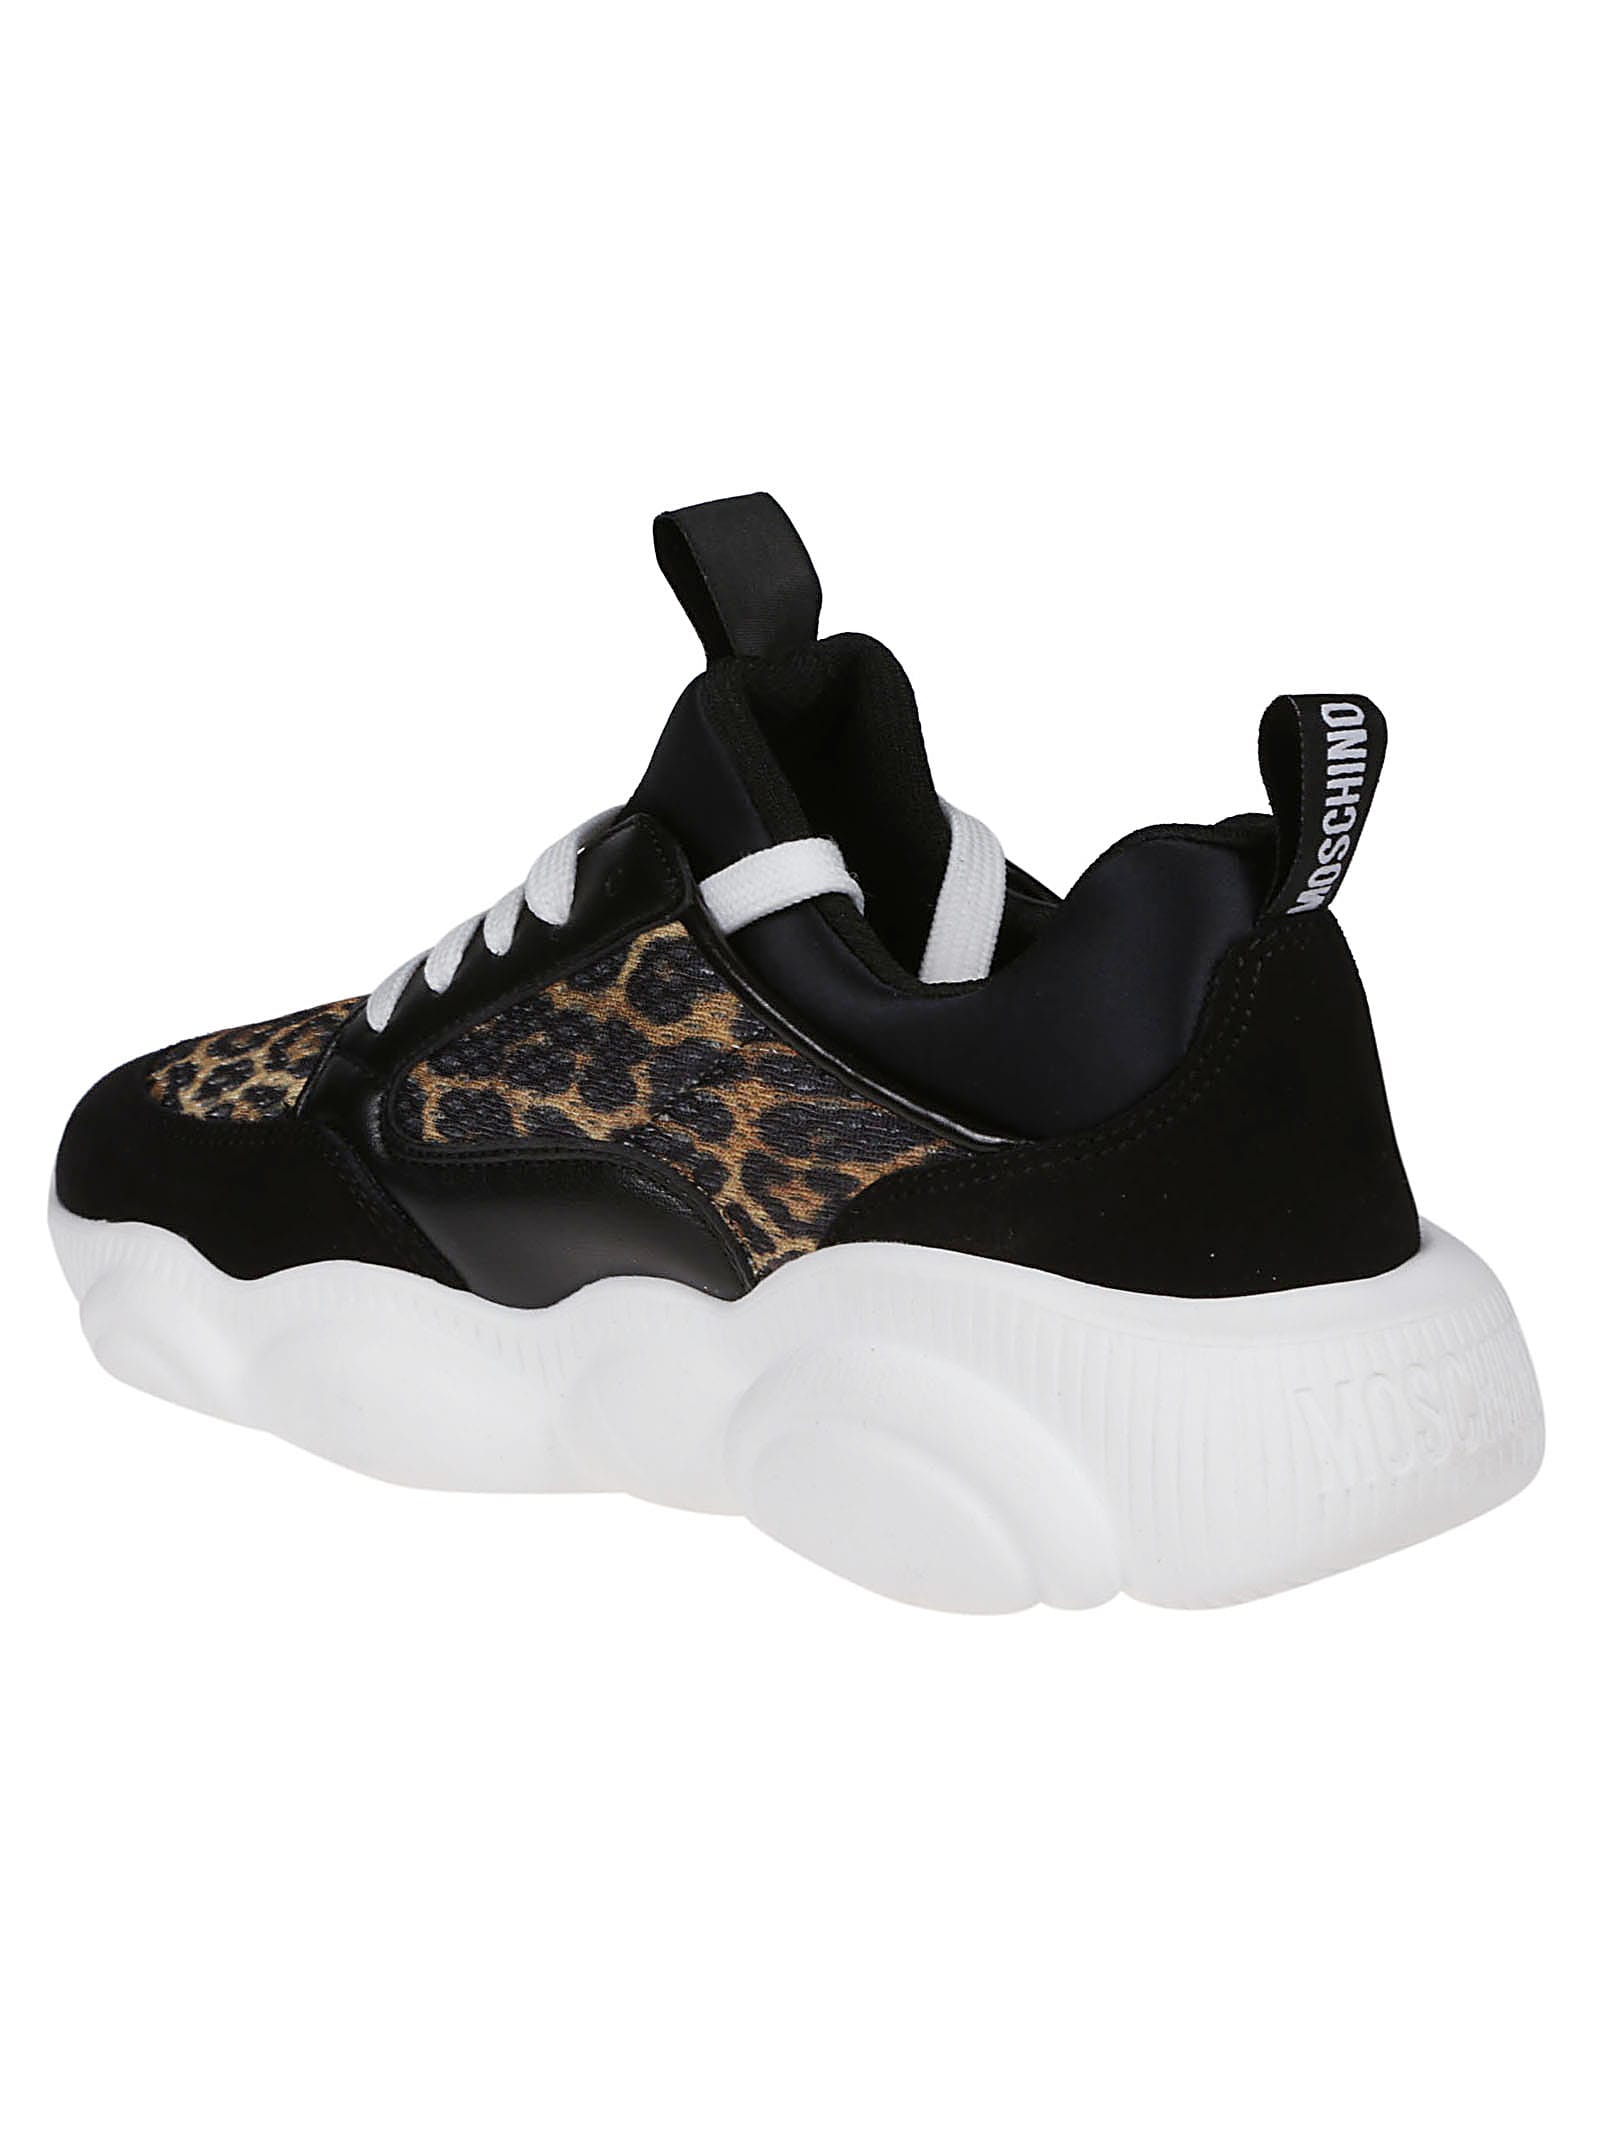 Moschino Leopard Print Sneakers 